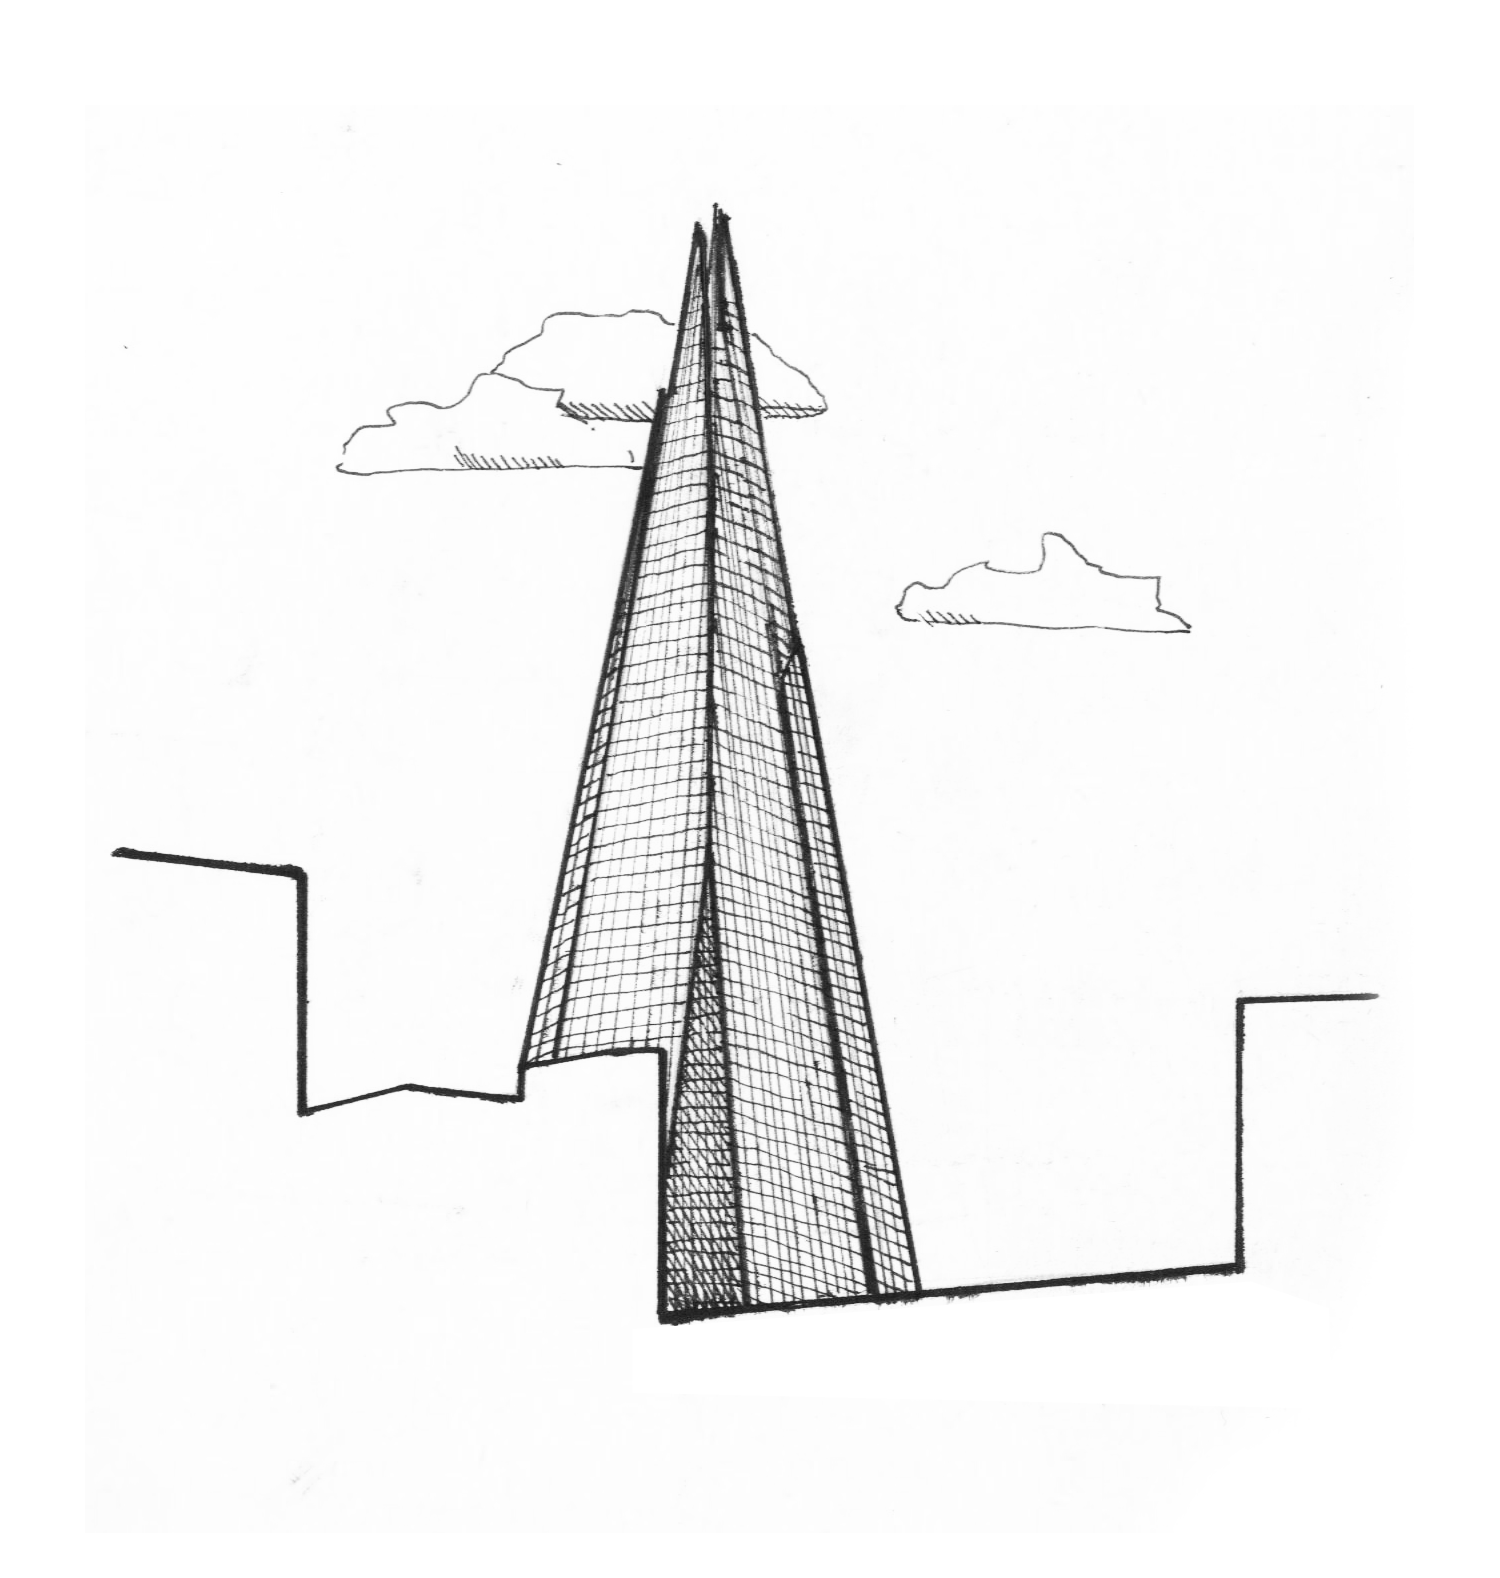 About The Shard | History of The Shard